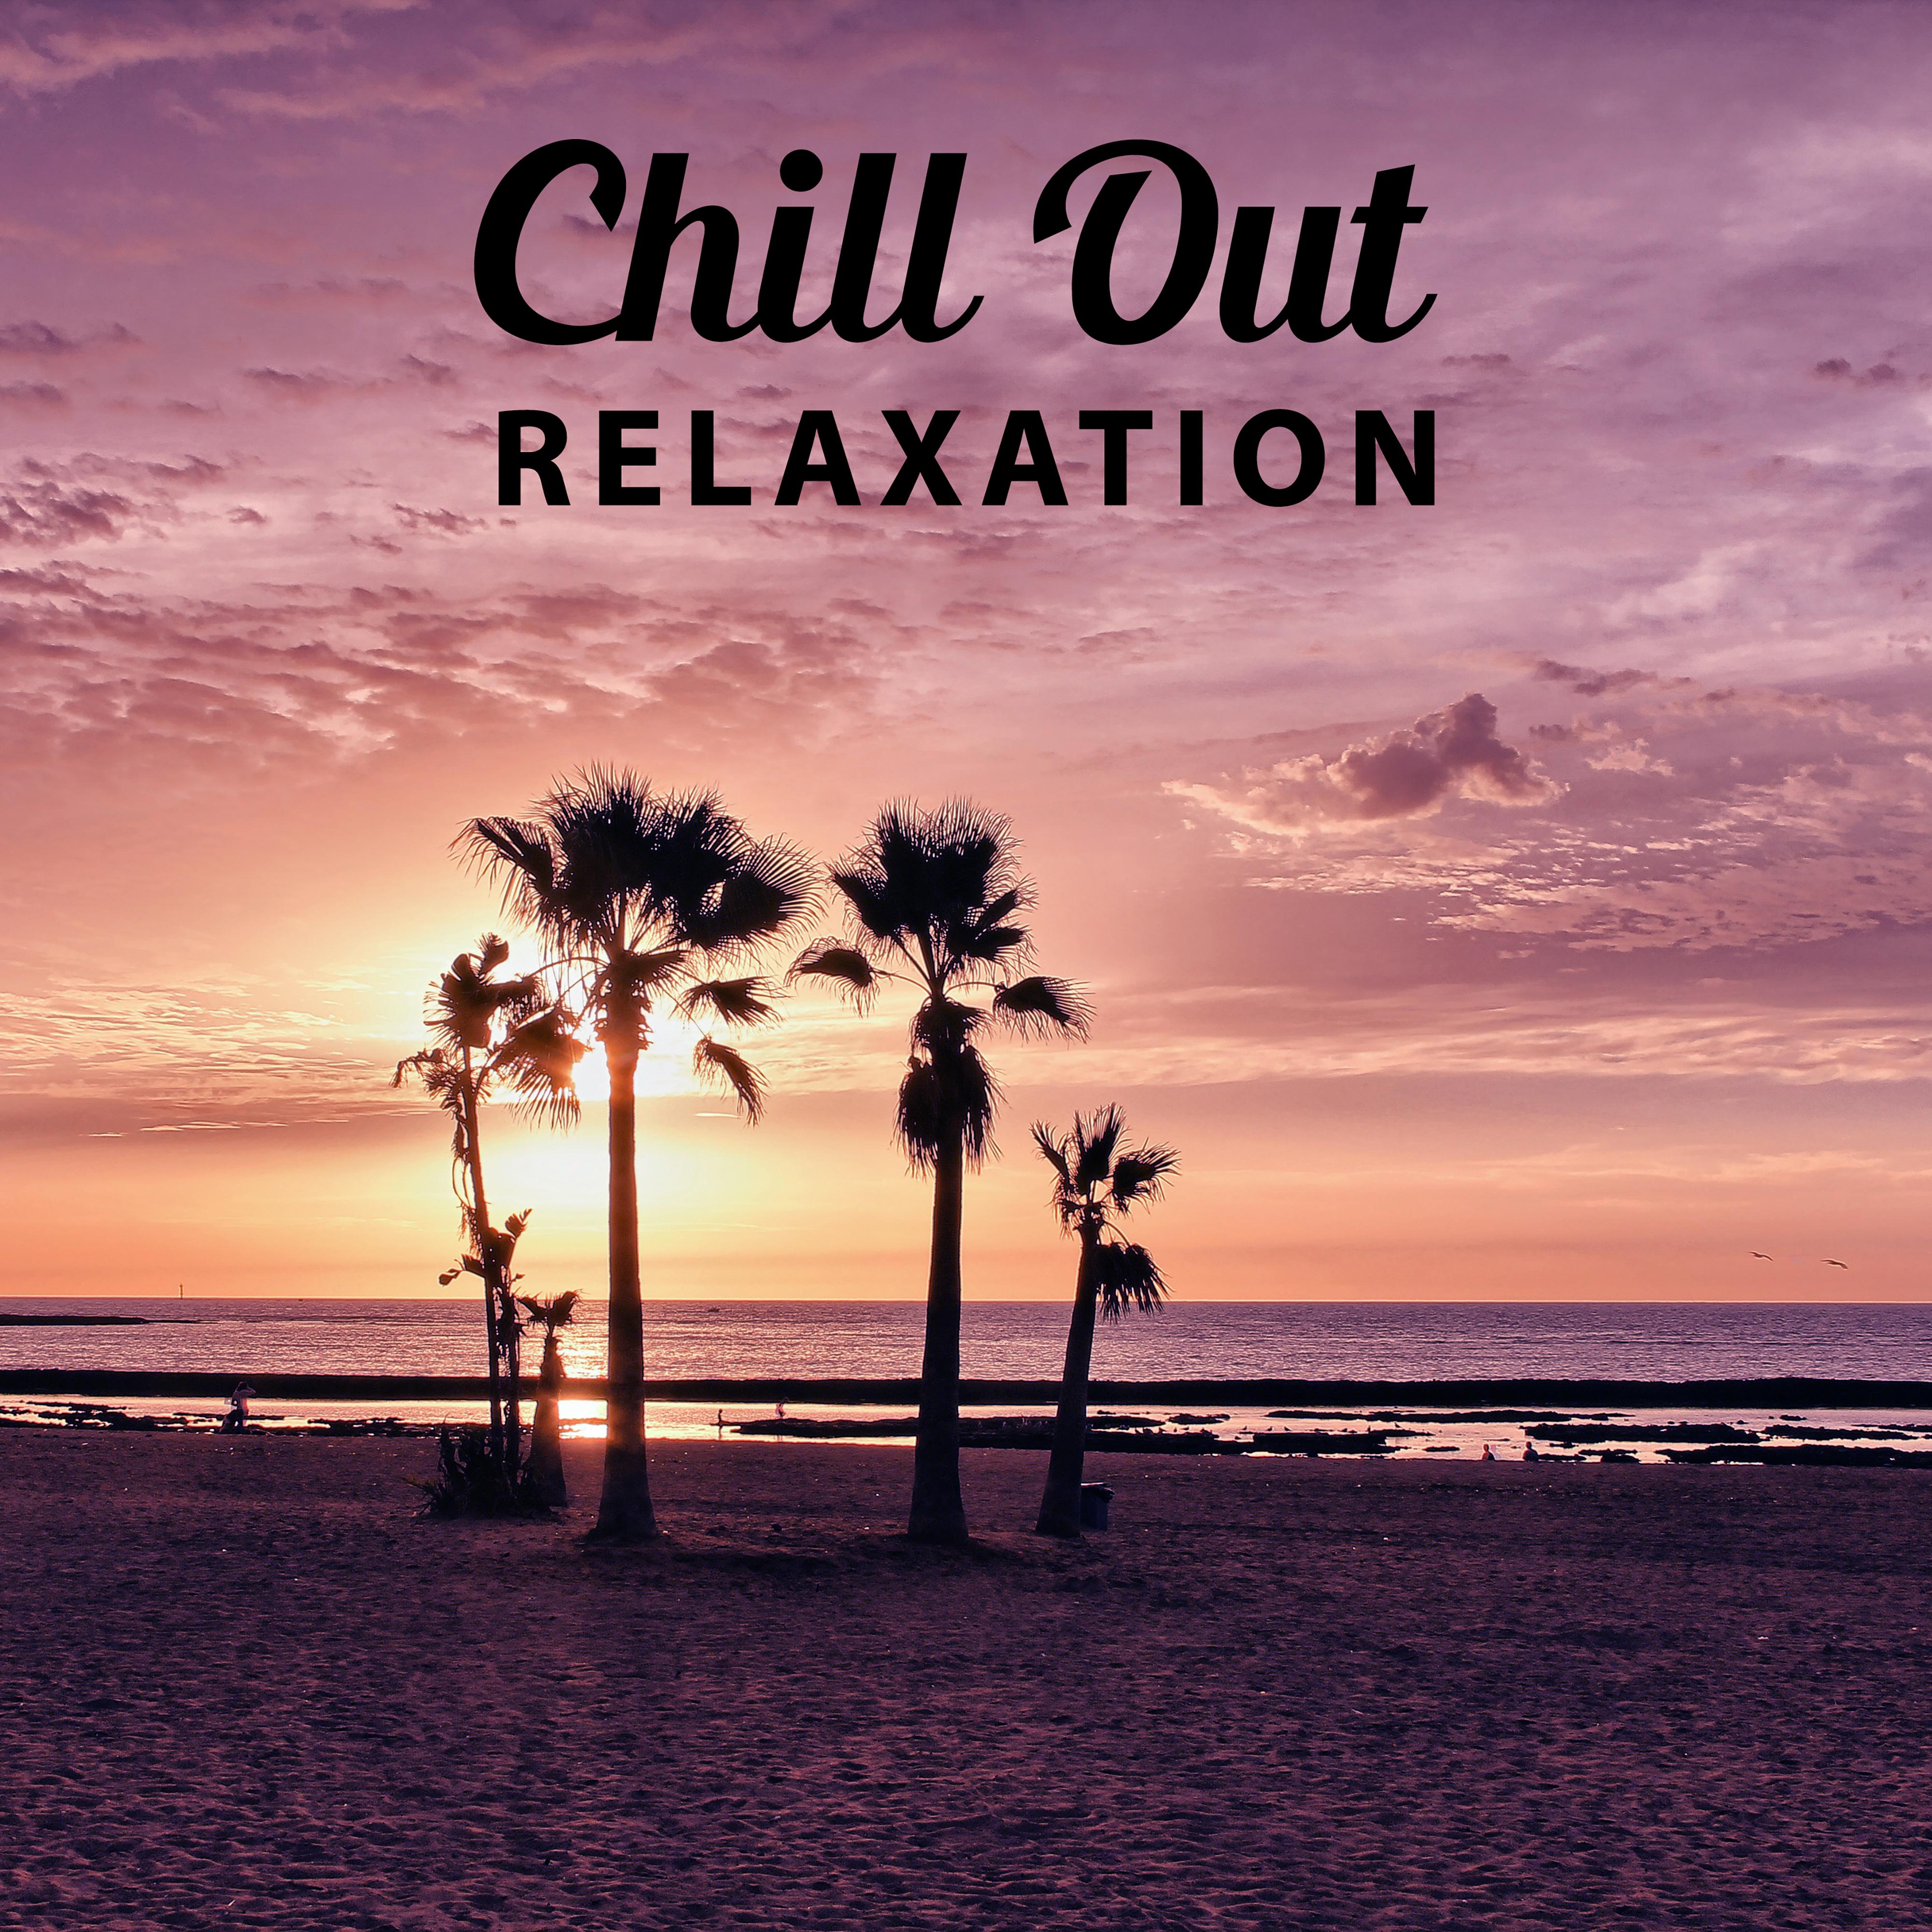 Chill Out Relaxation  Chillout Music, Peaceful Sounds, Beach House, Bar Lounge